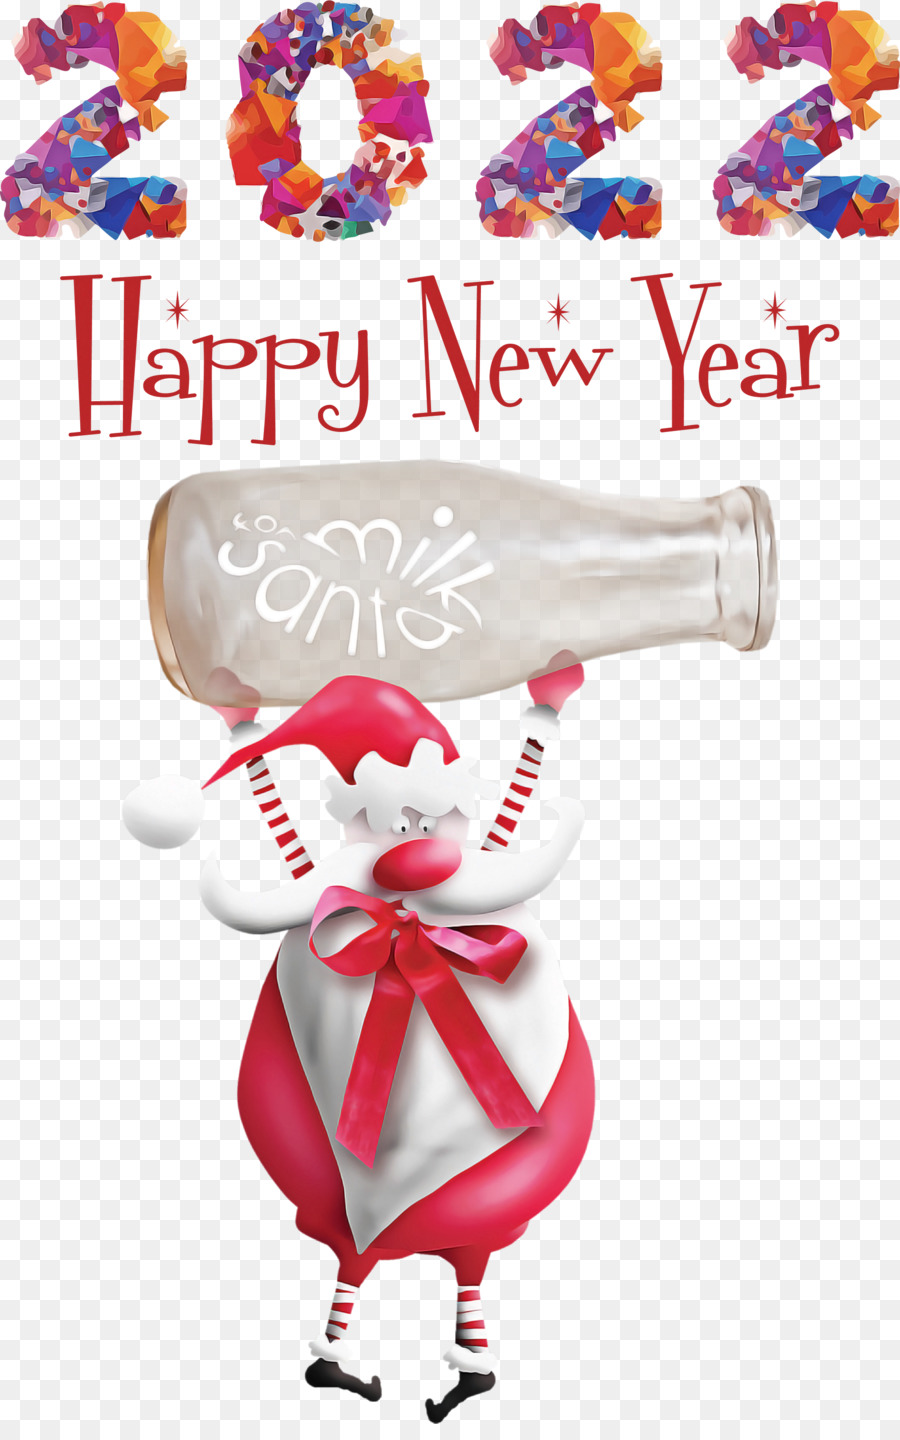 Happy New Year 2022 2022 New Year 2022 png download - 1896*3000 ...